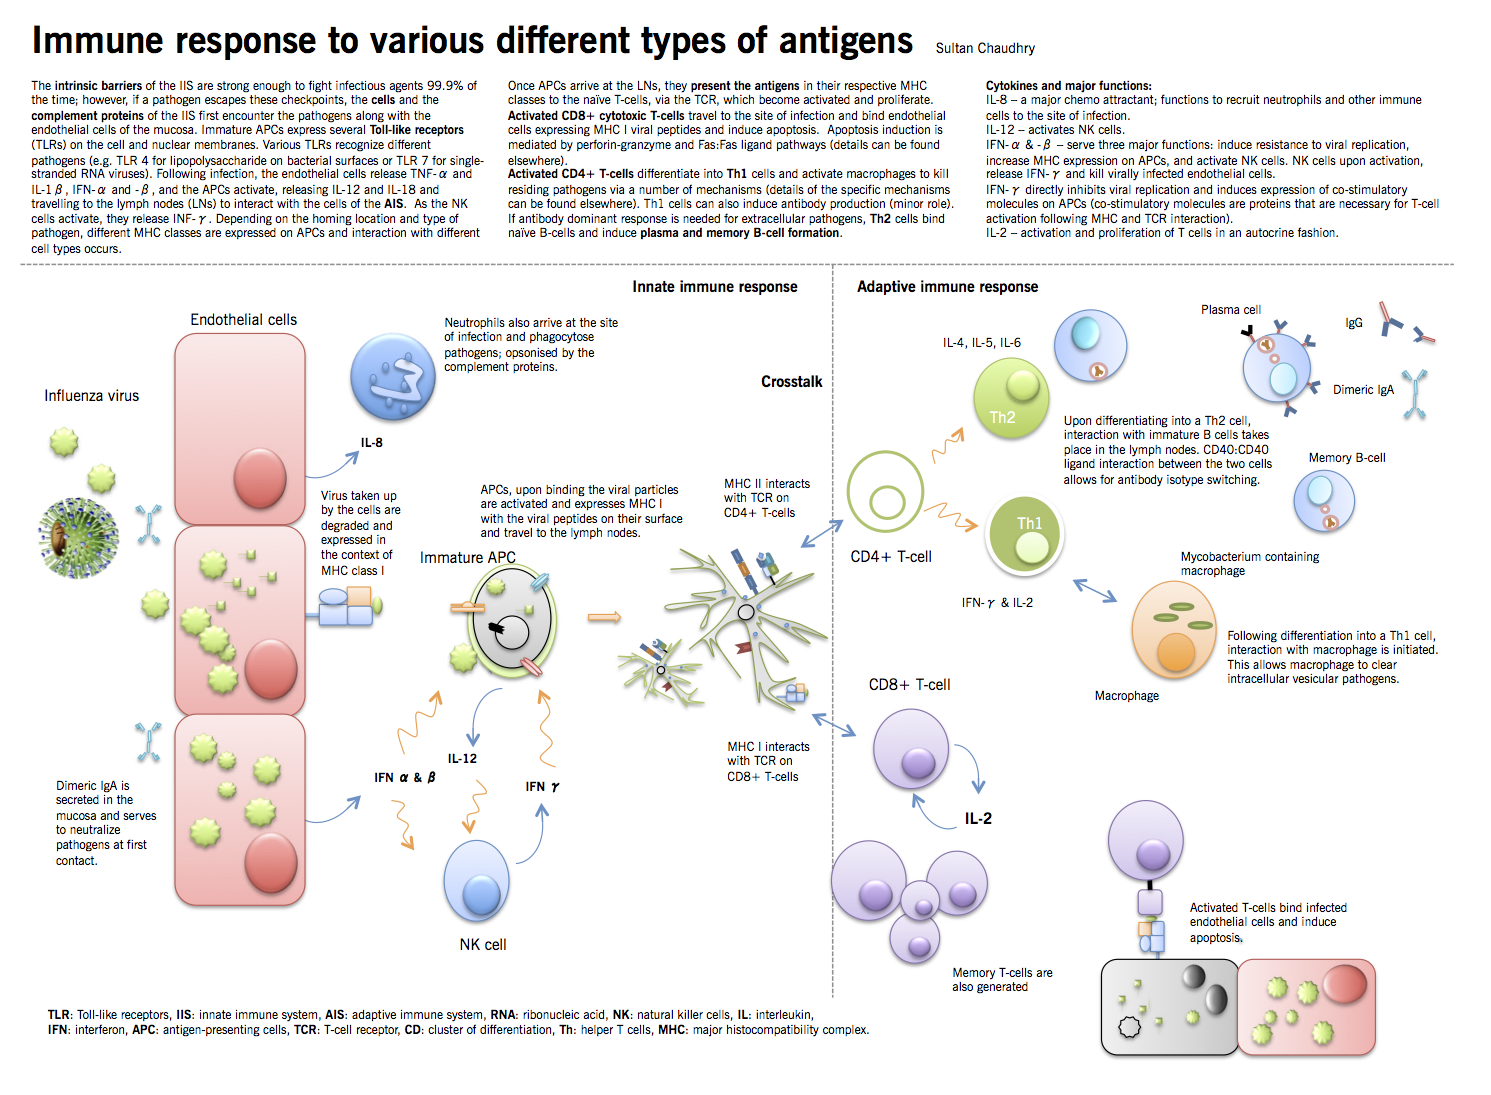 Immune System Cell Types Chart